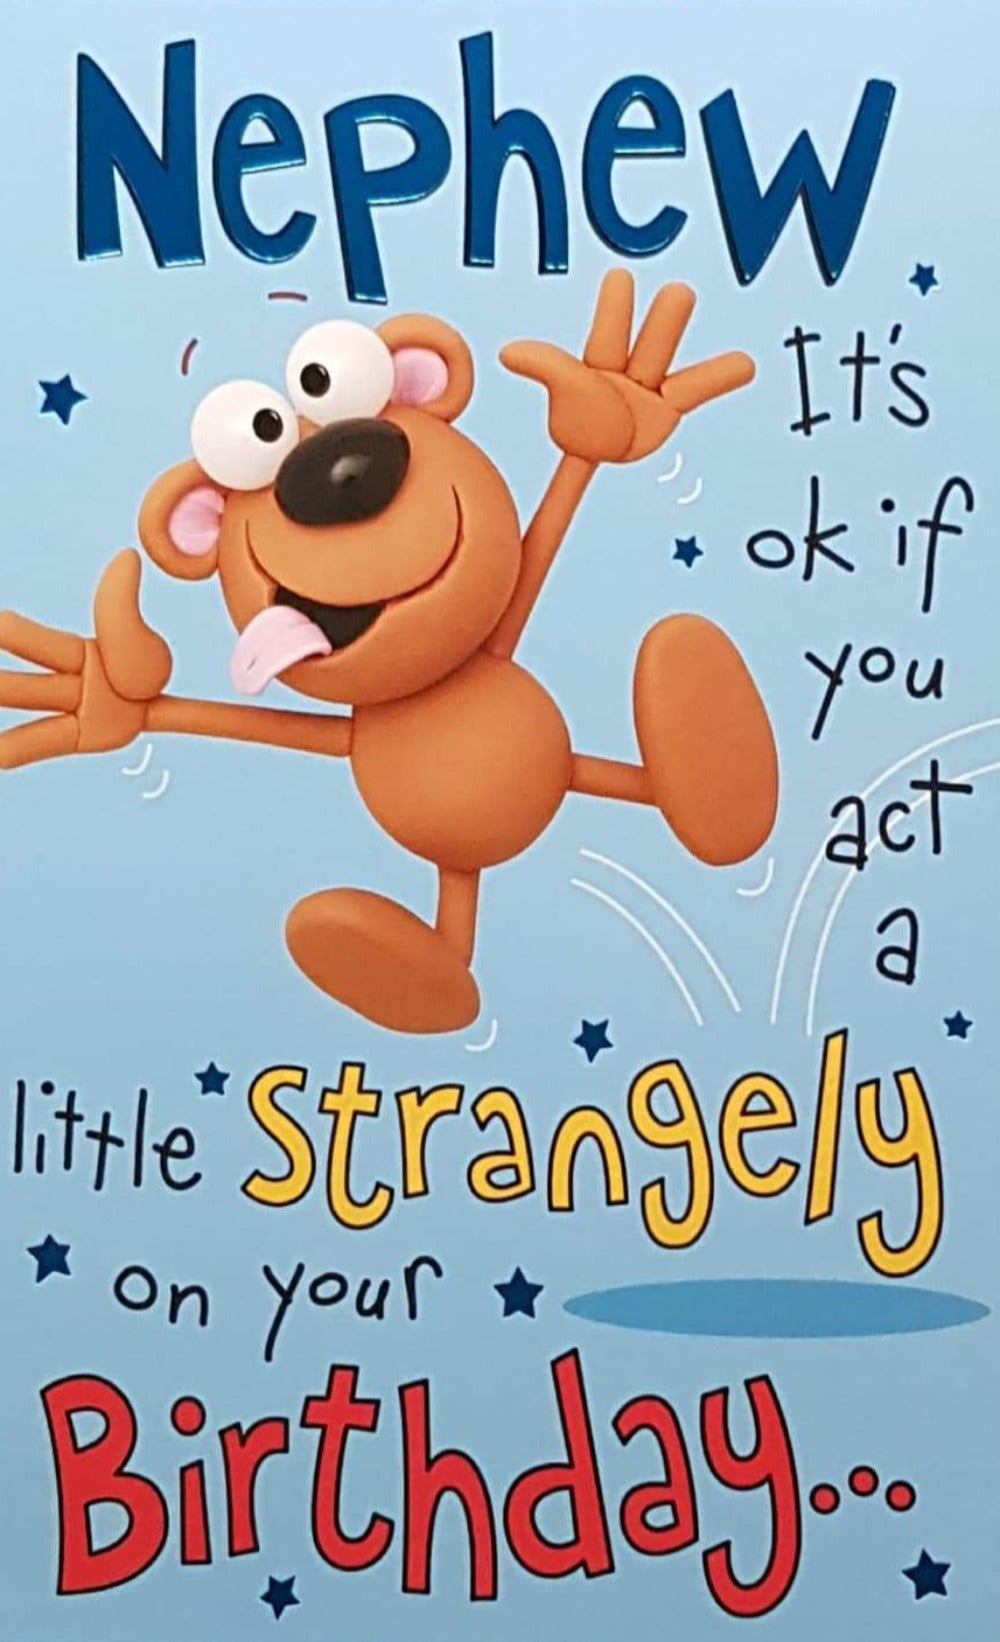 Birthday Card - Nephew / 'It's Ok If You Act A Little Strangely' & A Dog Jumping